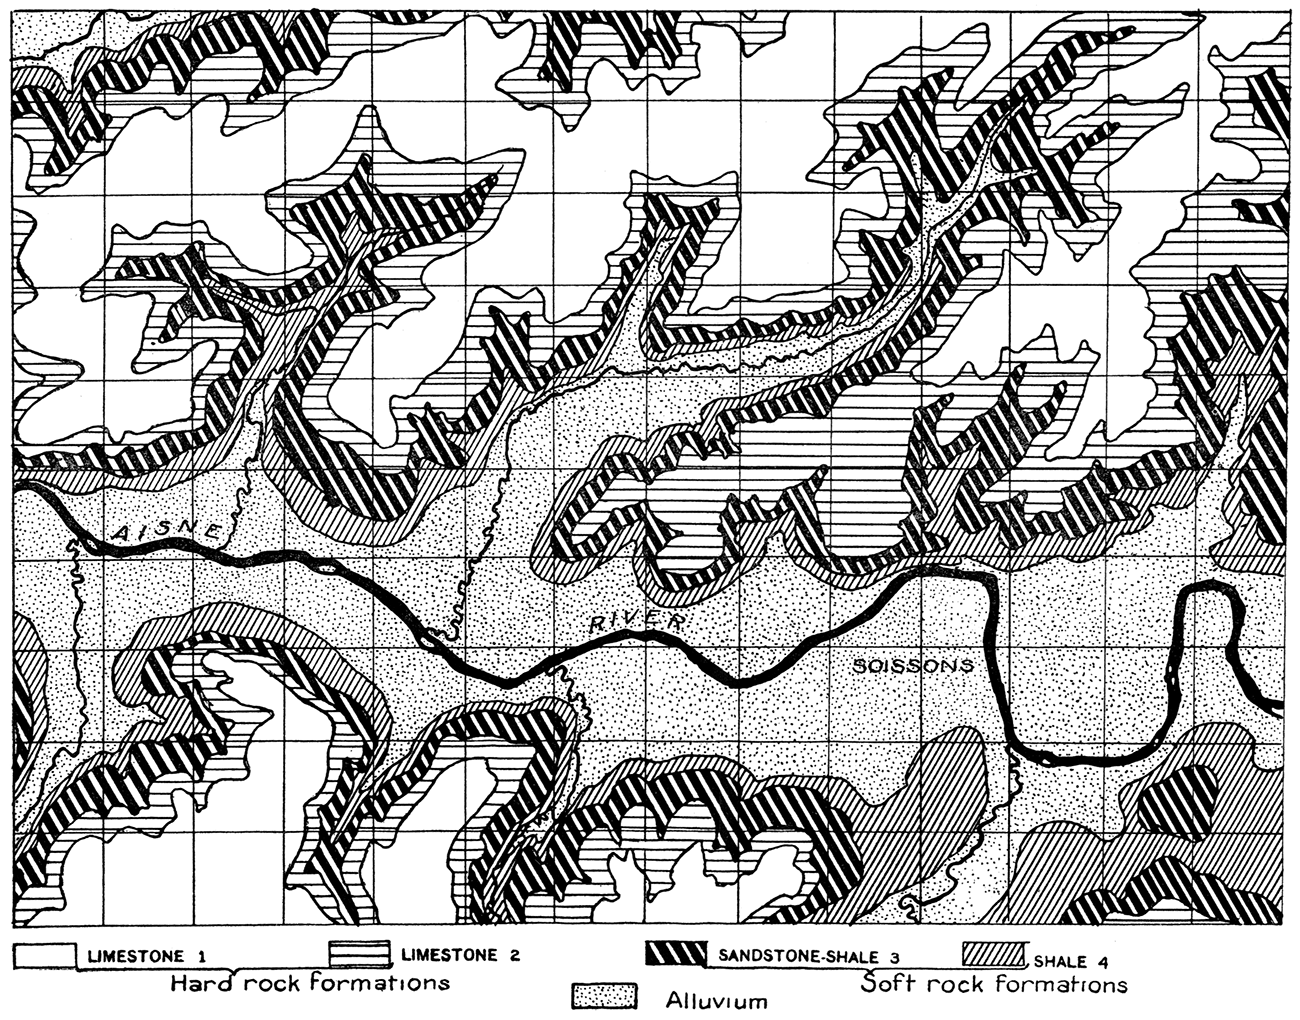 Geologic map of region about Soissons, France.